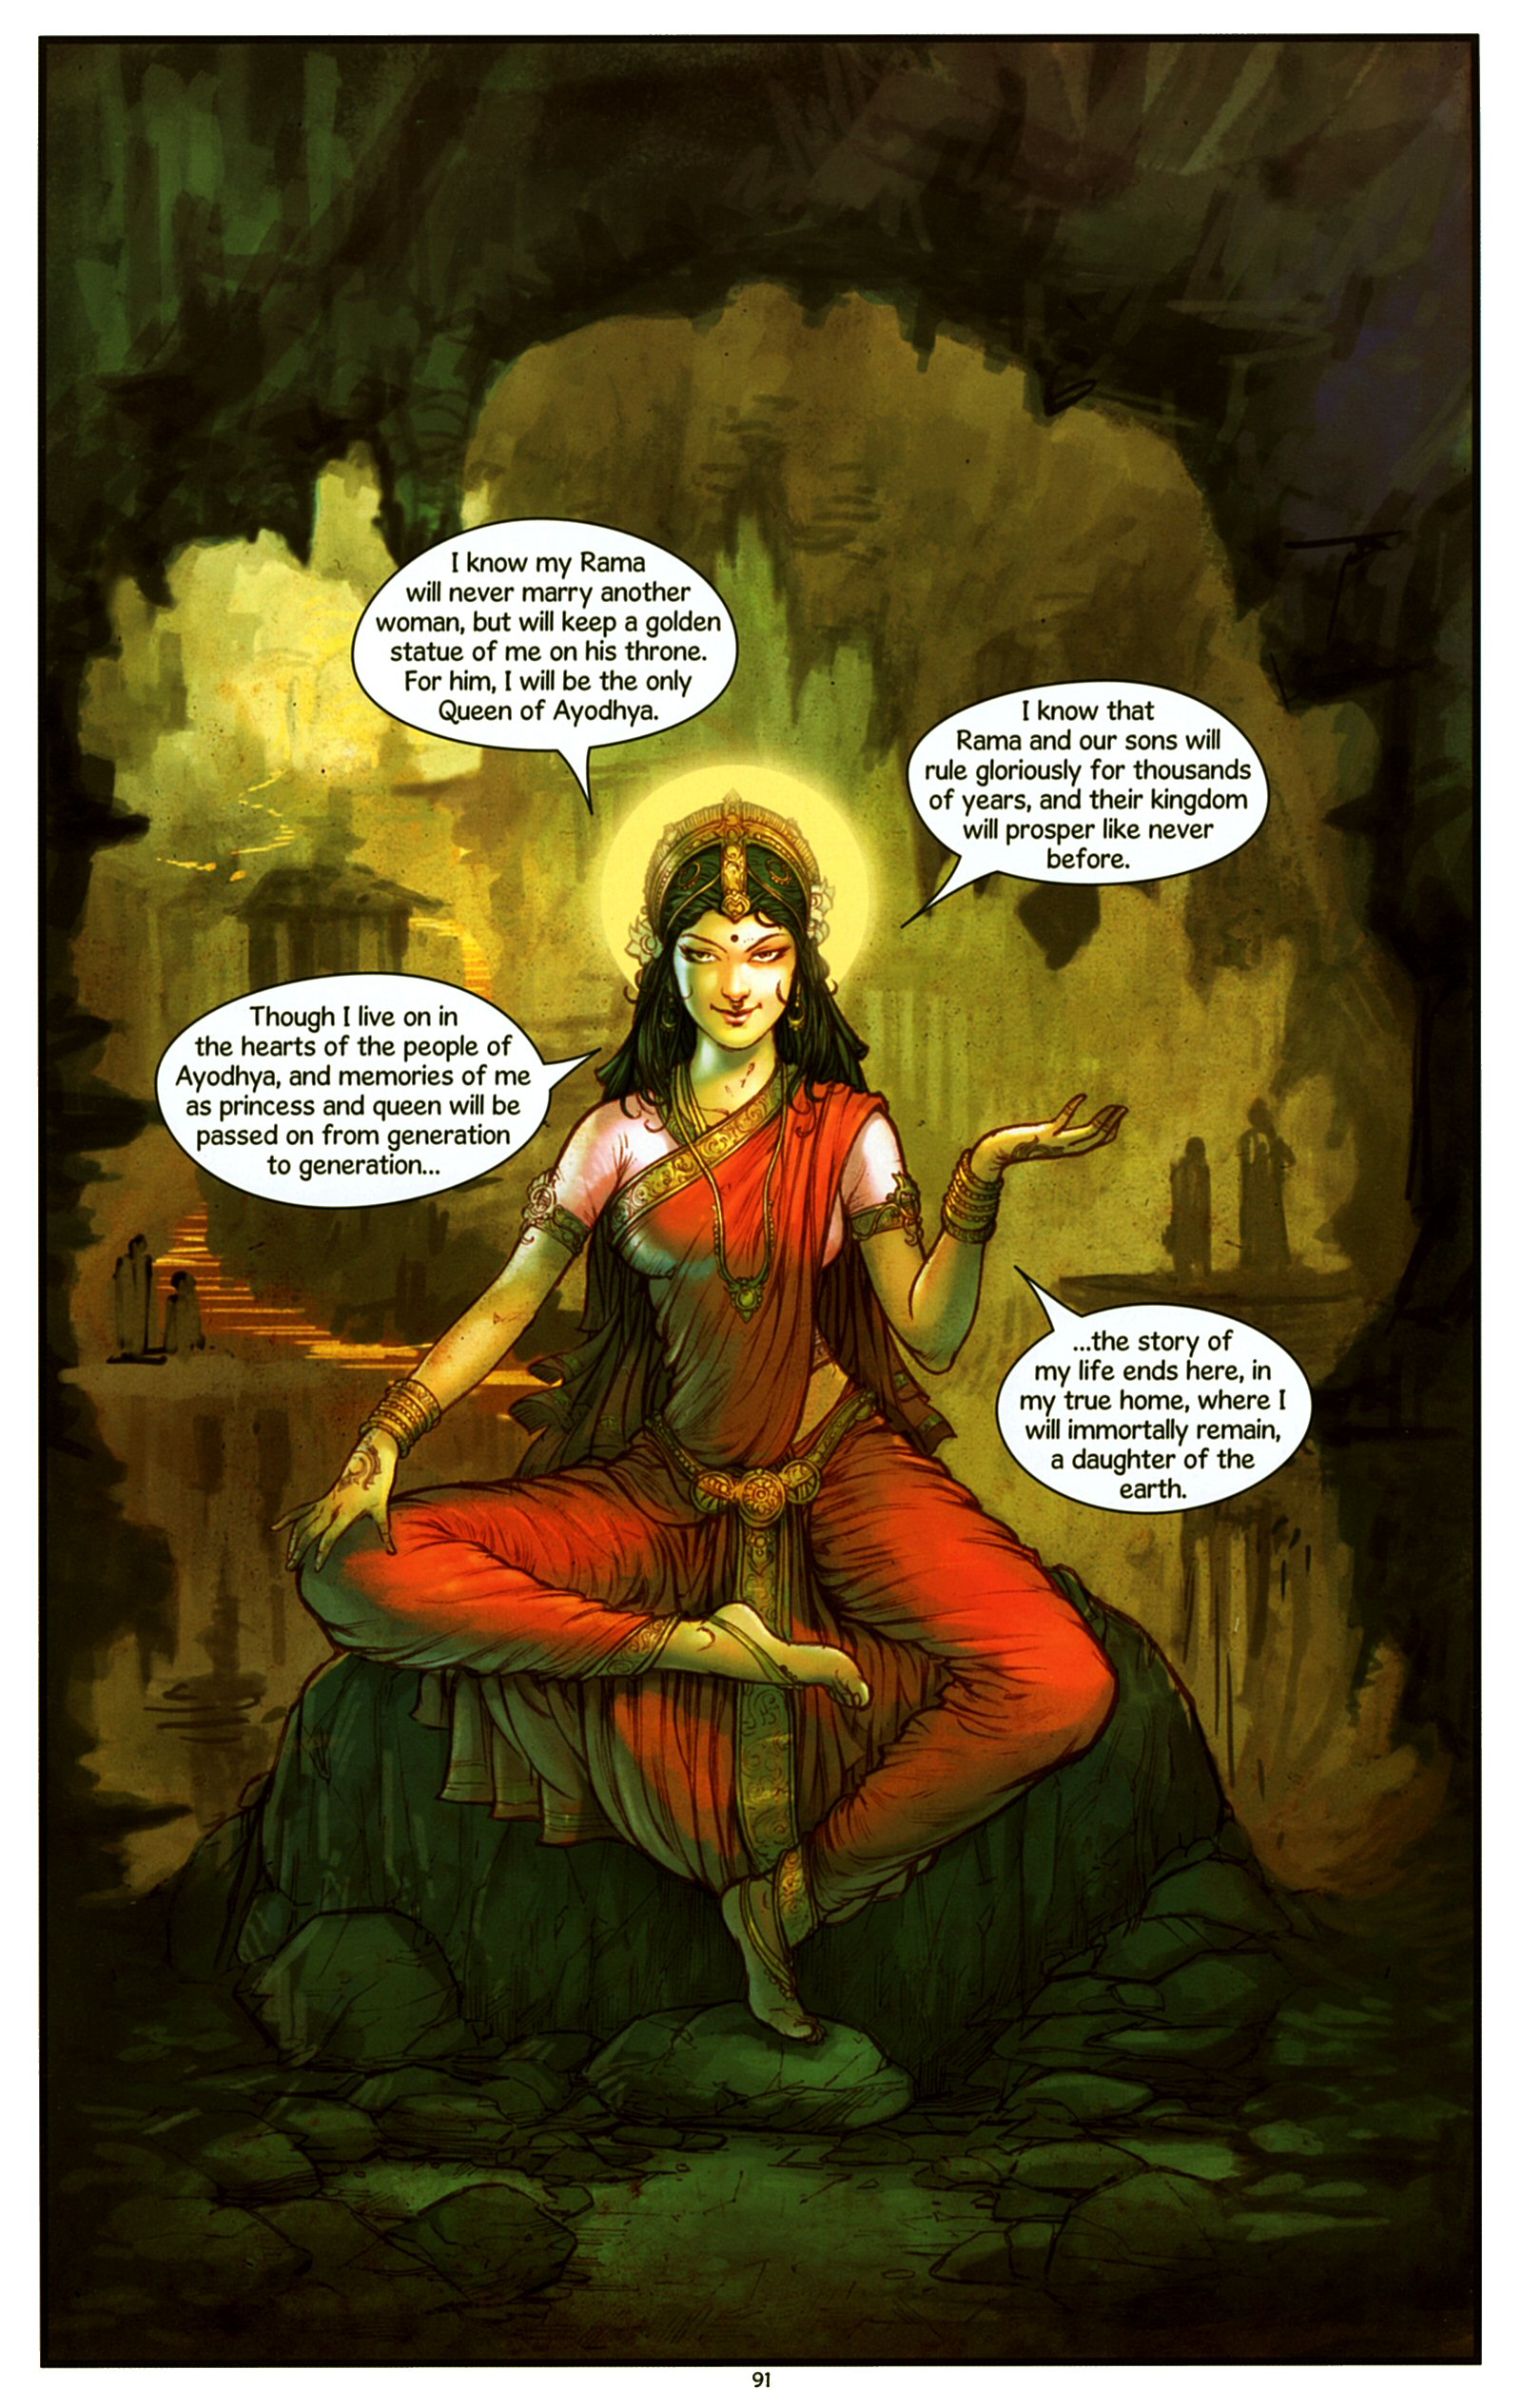 Read online Sita Daughter of the Earth comic -  Issue # TPB - 95